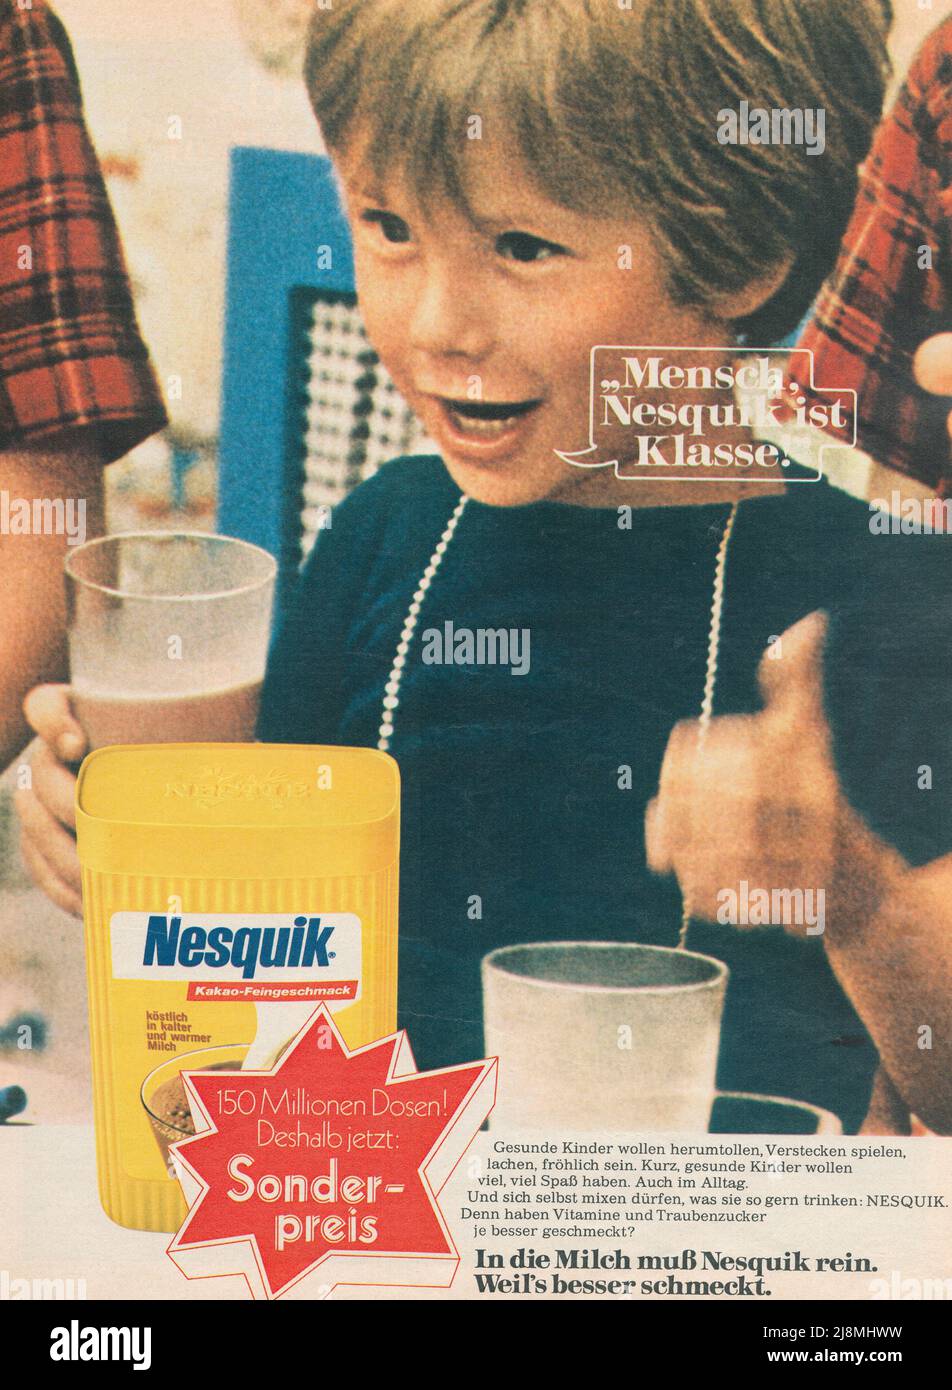 Vintage retro paper advertisement of Nesquik chocolate drink Children drinking Nesquik drink from glasses with straw German paper advert from 1980s Stock Photo